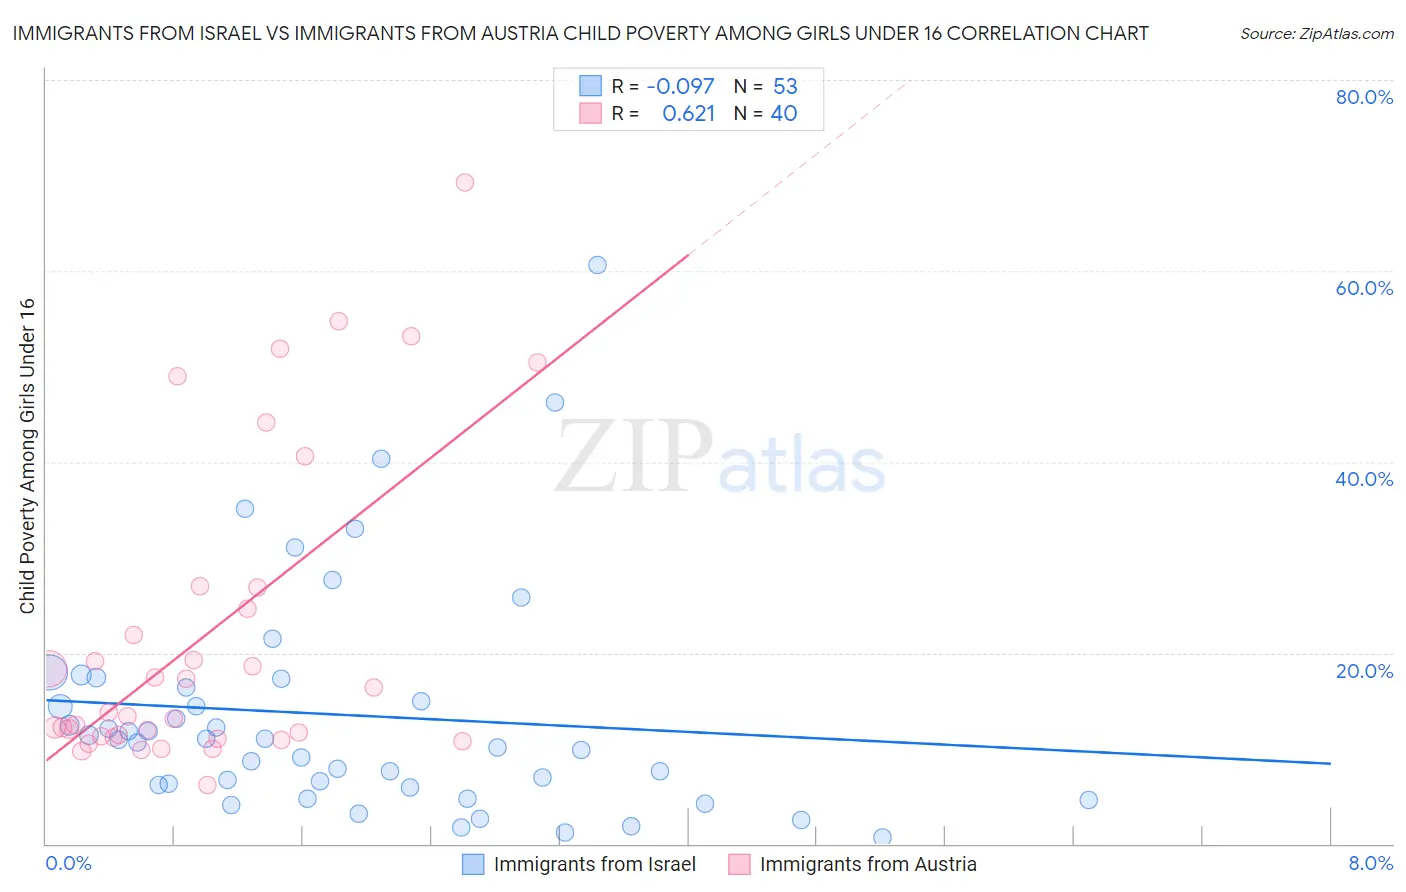 Immigrants from Israel vs Immigrants from Austria Child Poverty Among Girls Under 16